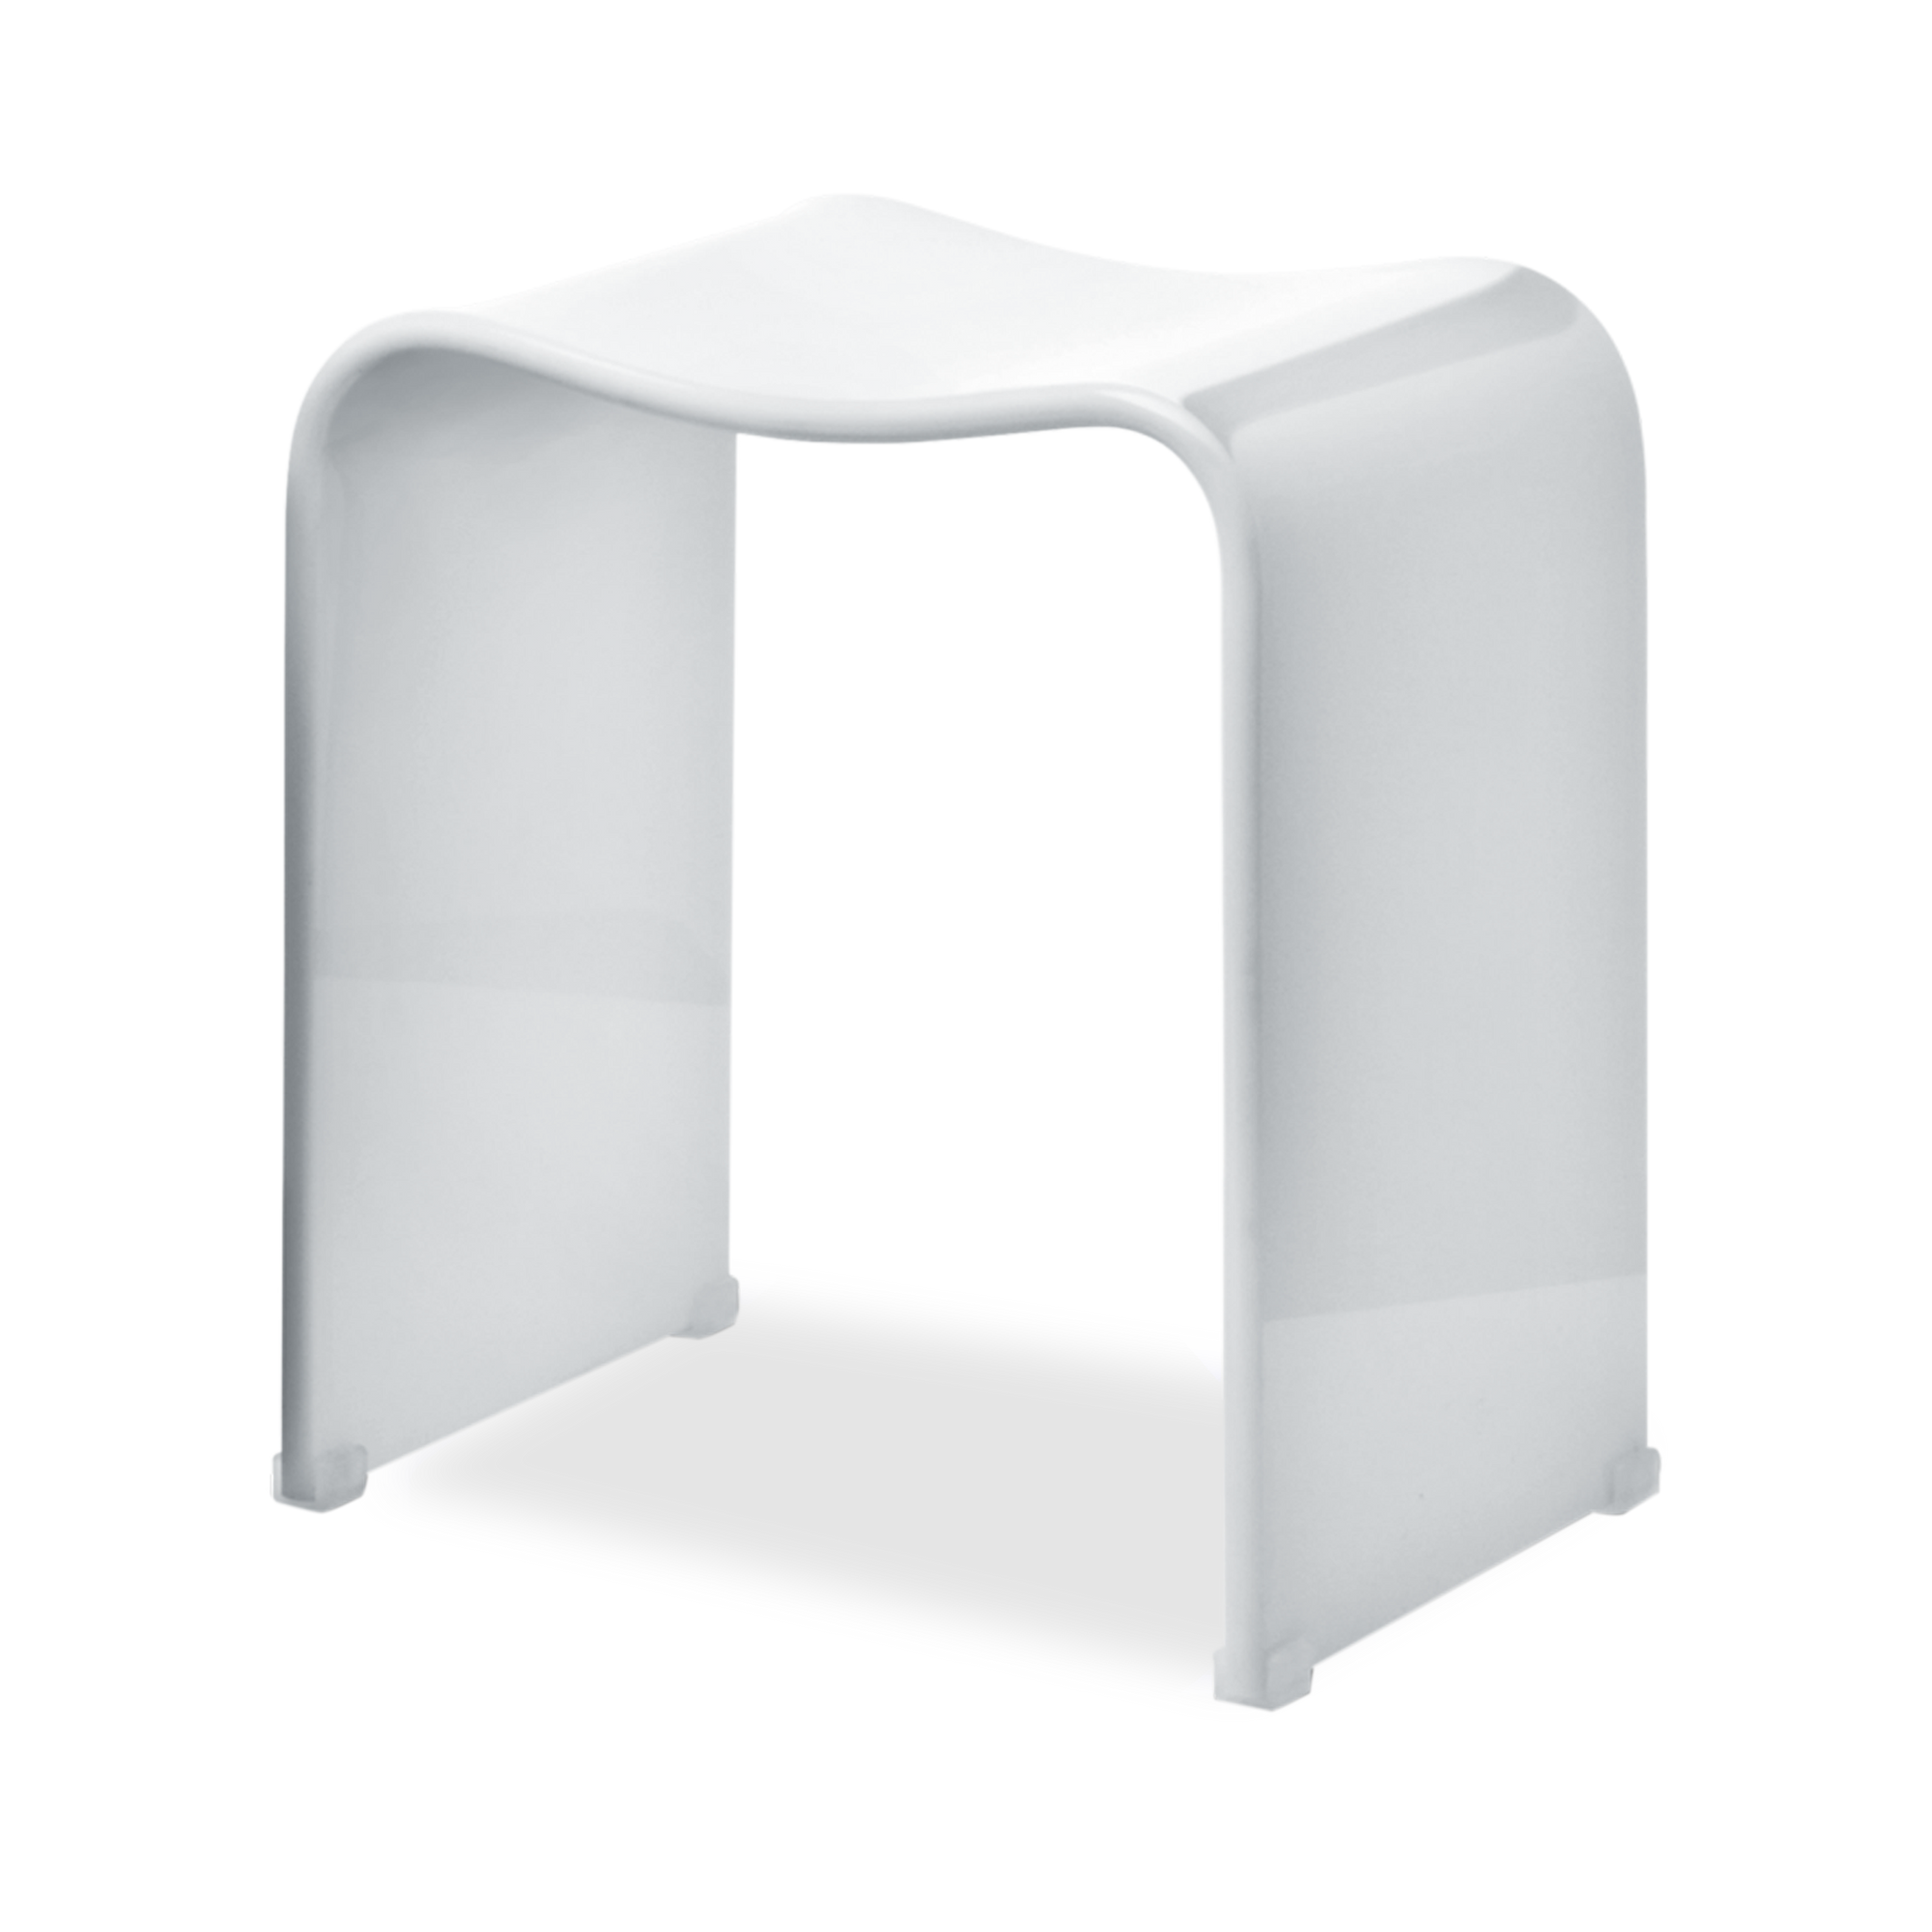 The Acrylic Bath Stool in white features a sleek design with elegant curves.